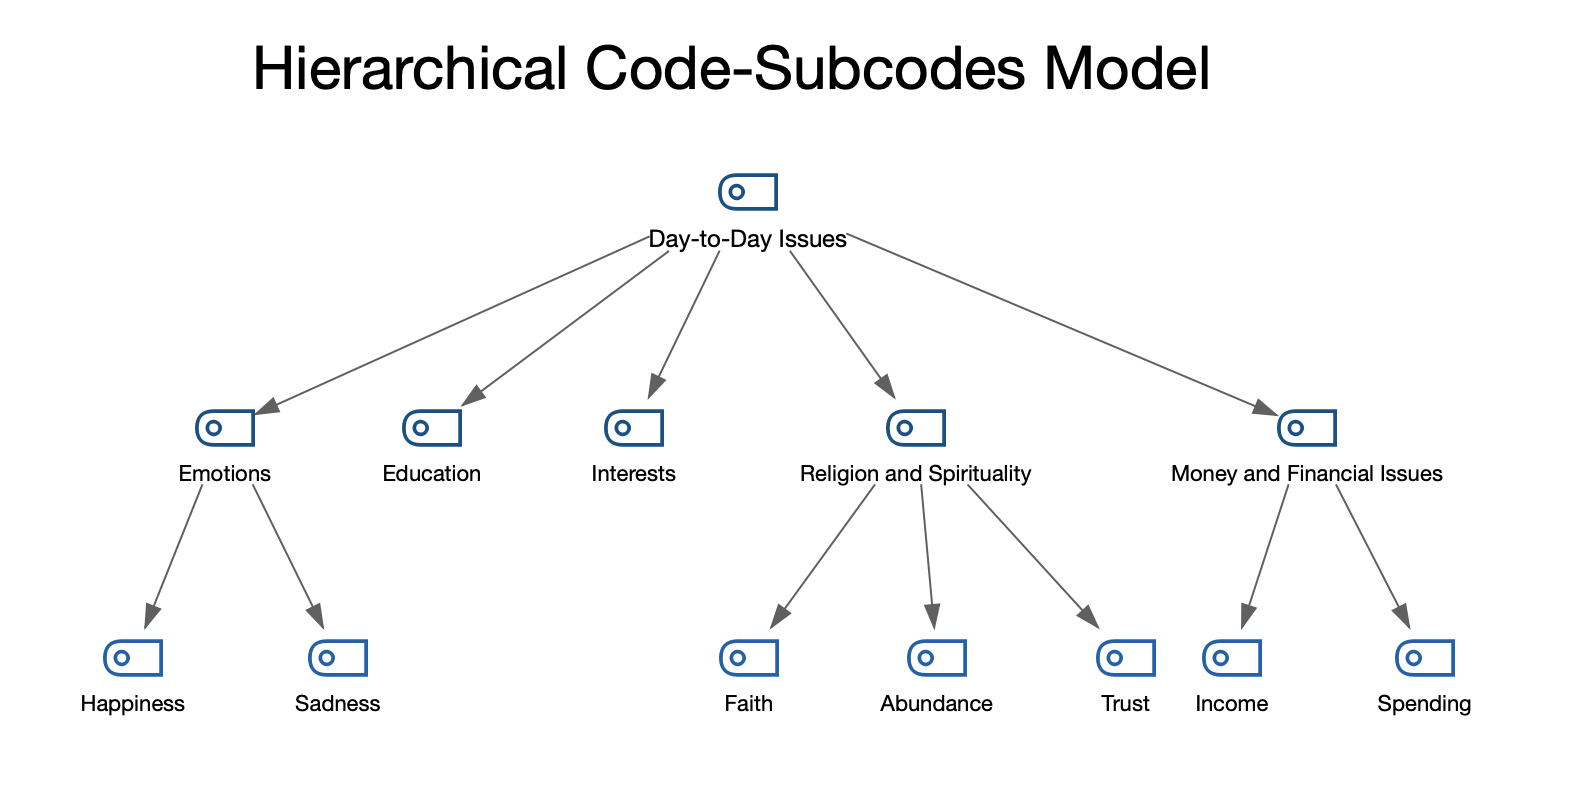 Example of a Hierarchical Code-Subcodes Model